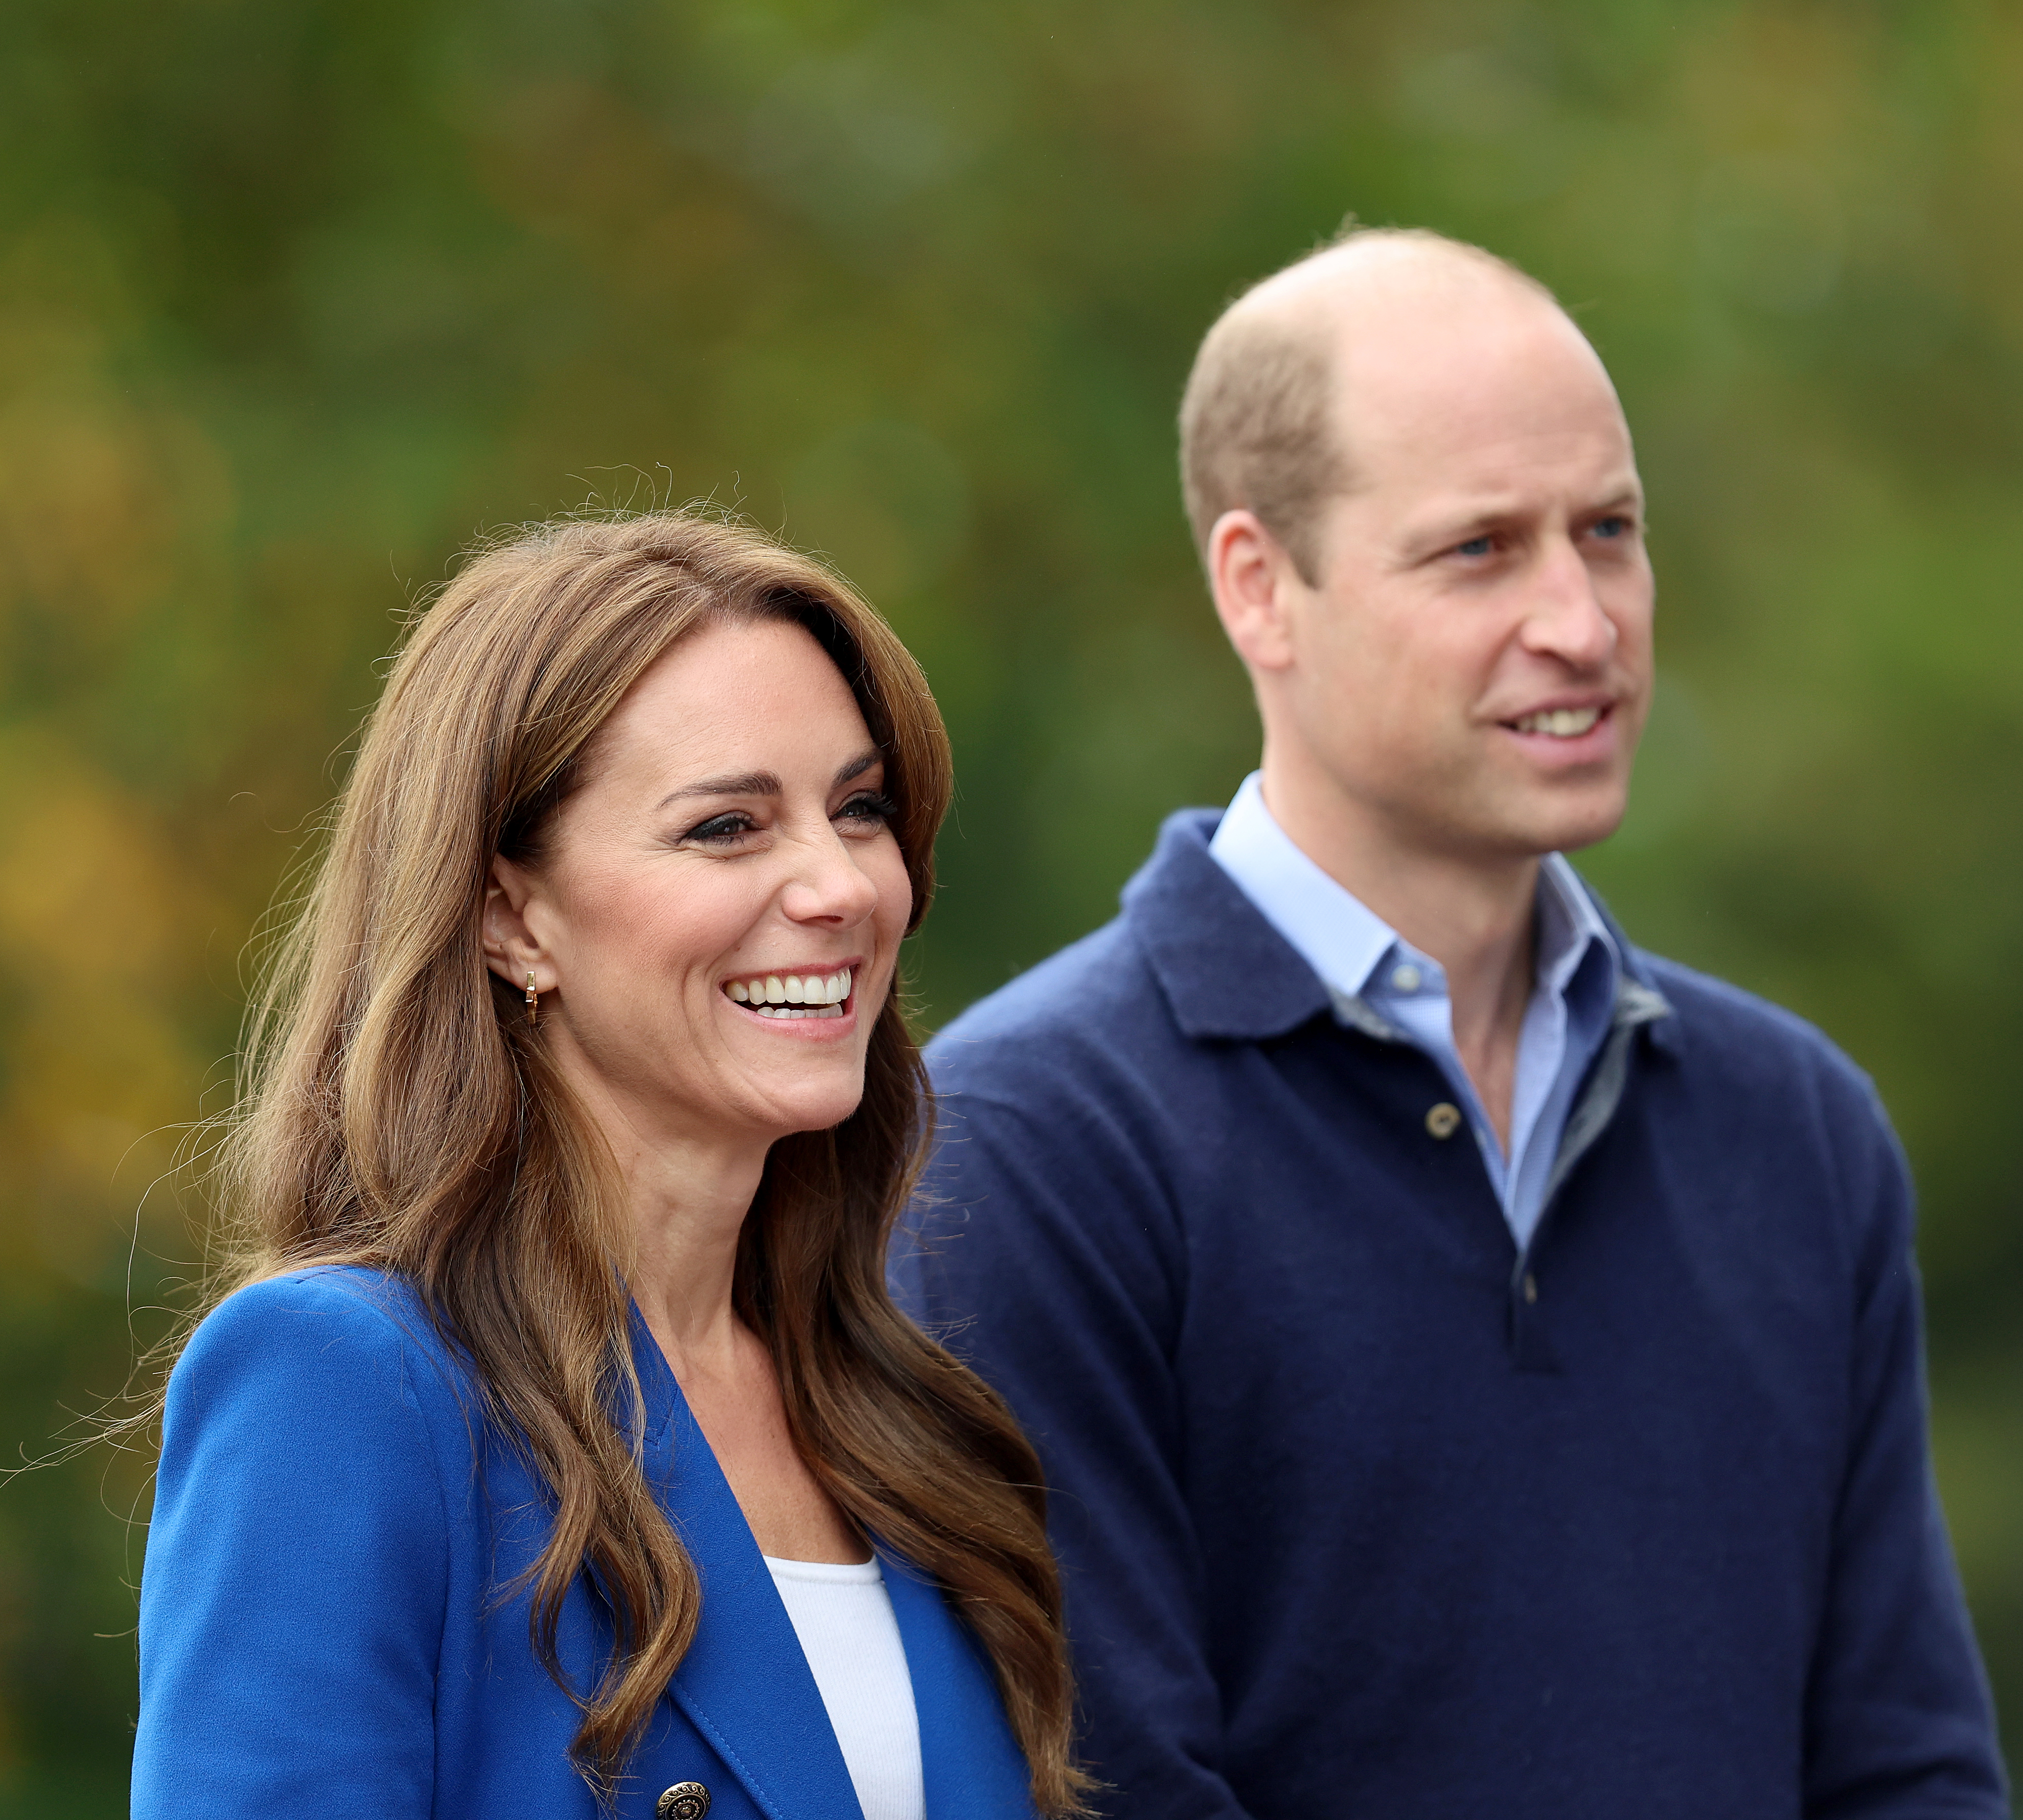 Kate Middleton and Prince William smiling, in casual attire, outdoors; Kate wears a blue blazer, William in a collared shirt